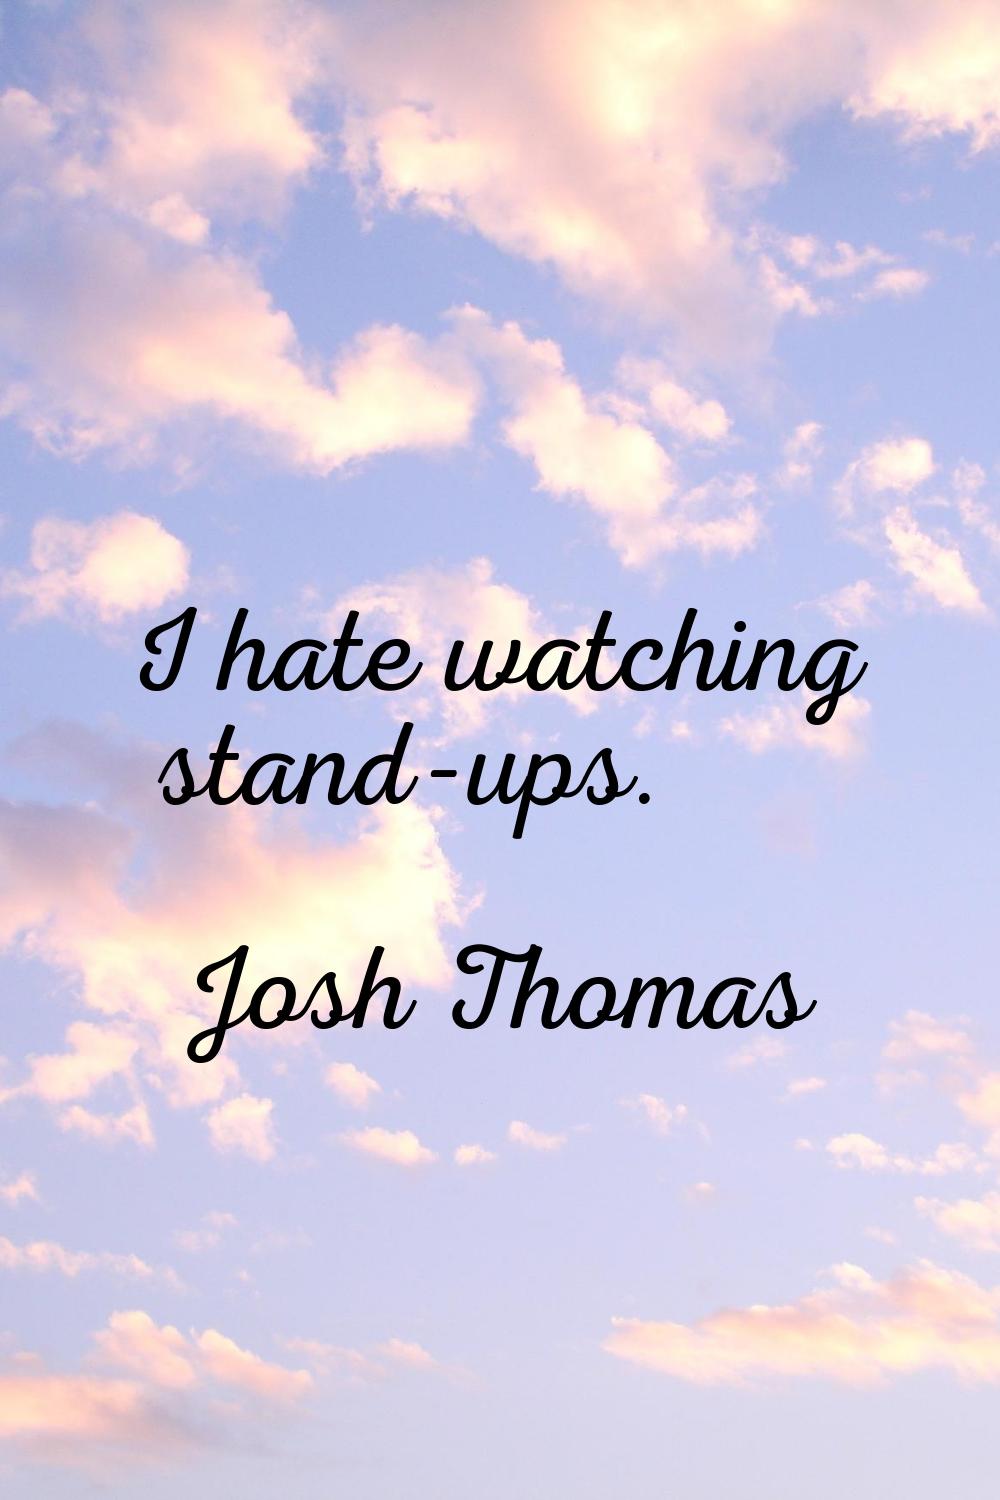 I hate watching stand-ups.